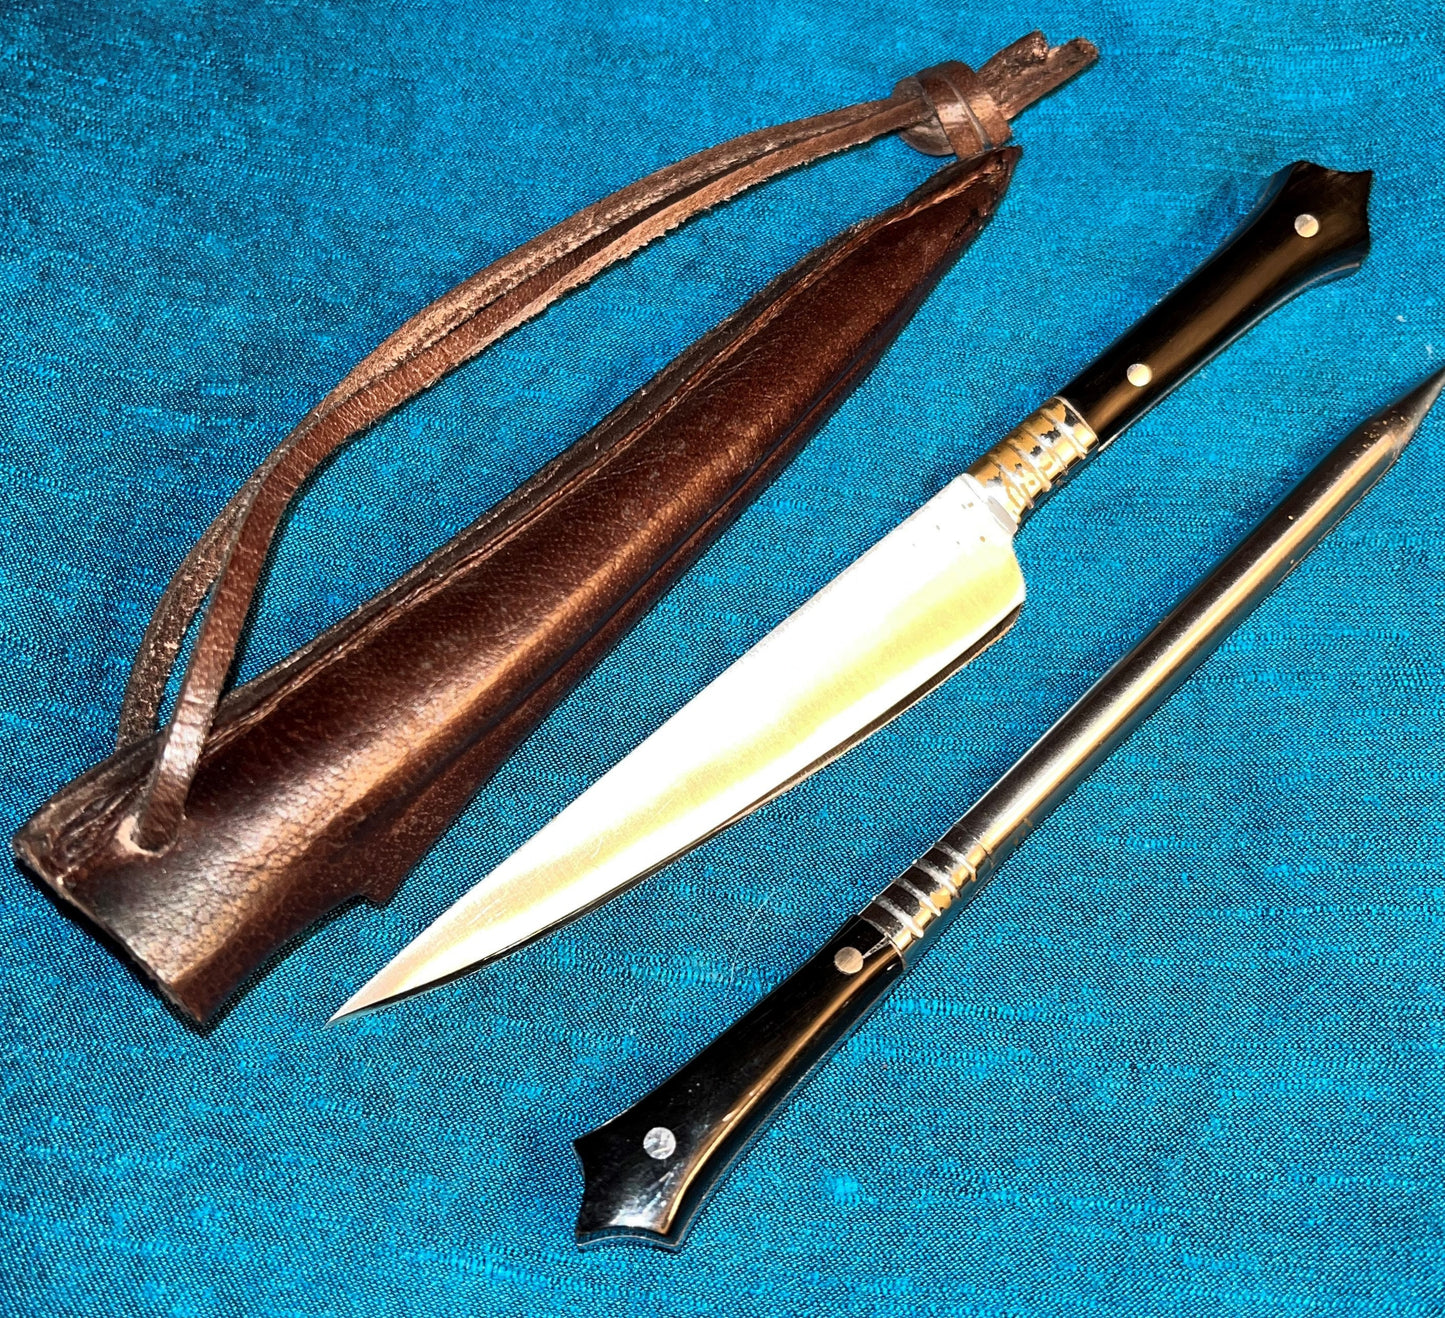 Minature Medieval Cutlery in a Sheath - Knife and Pricker